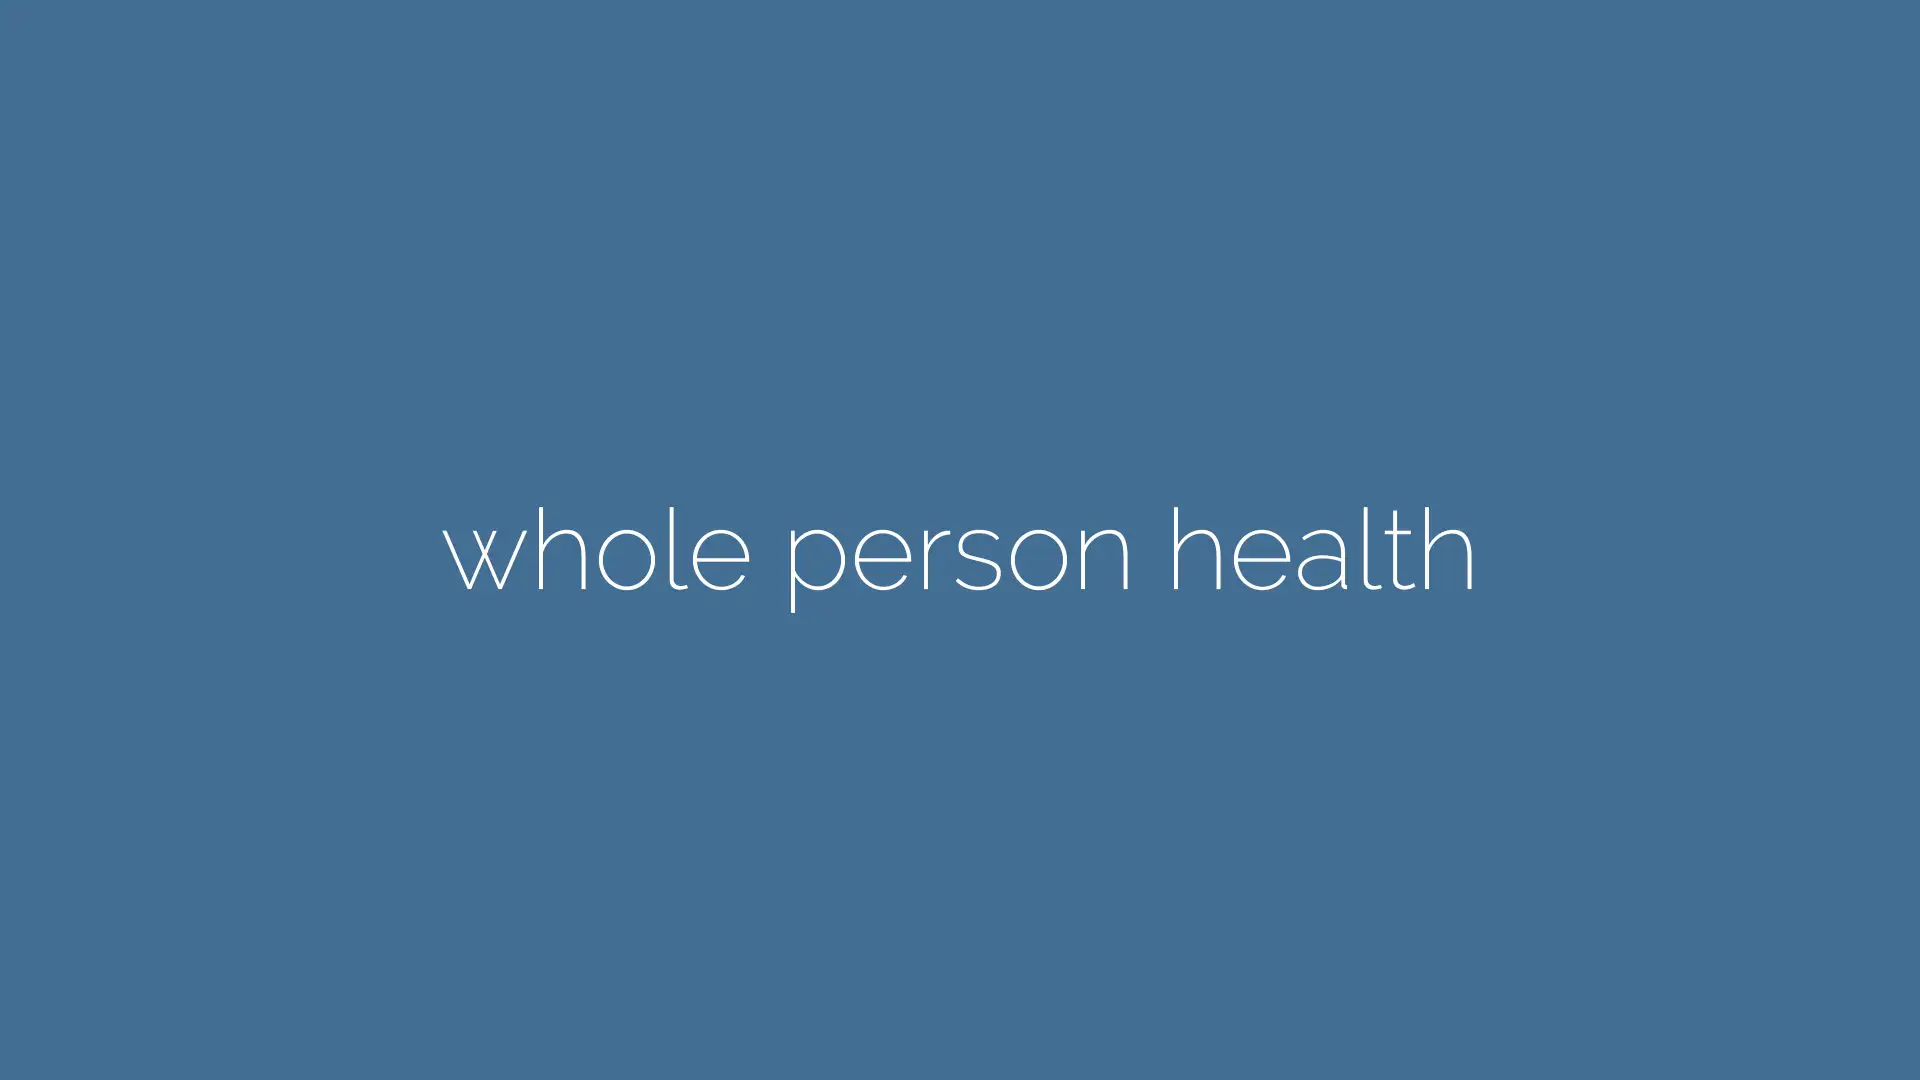 Featured image for “whole person health”